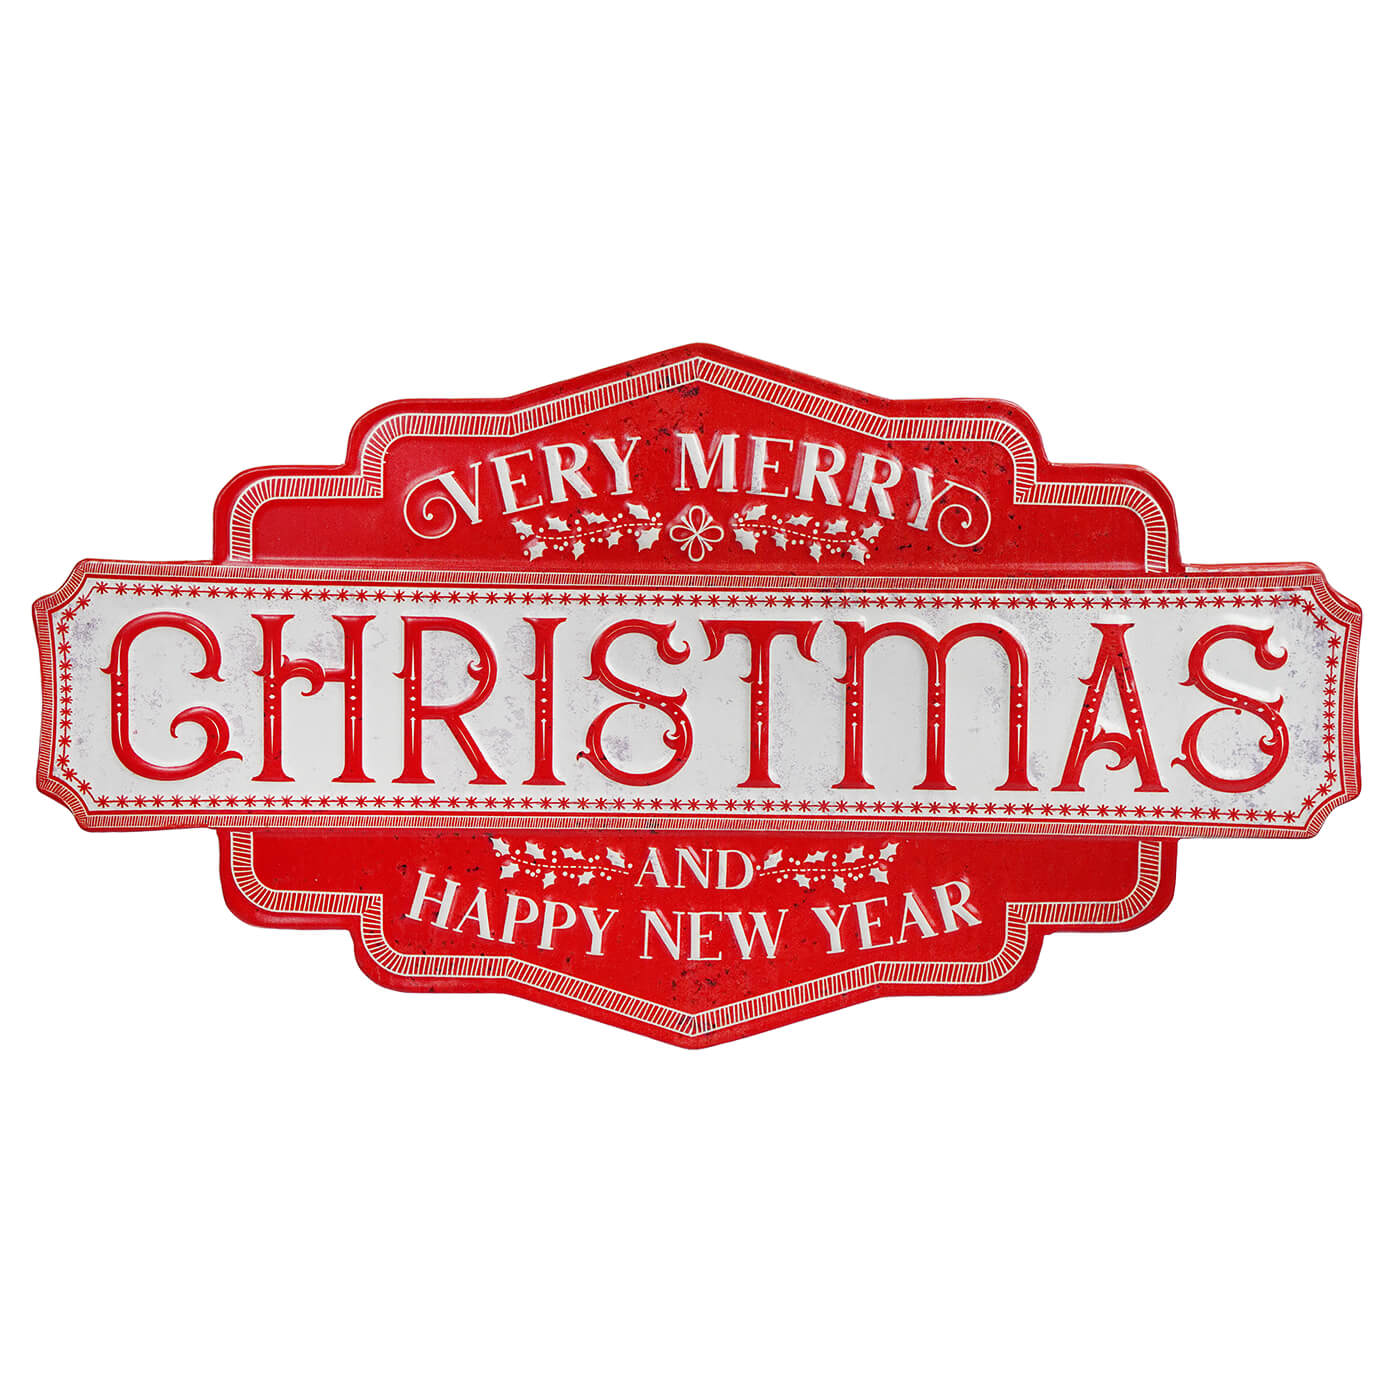 Merry Christmas & Happy New Year Sign